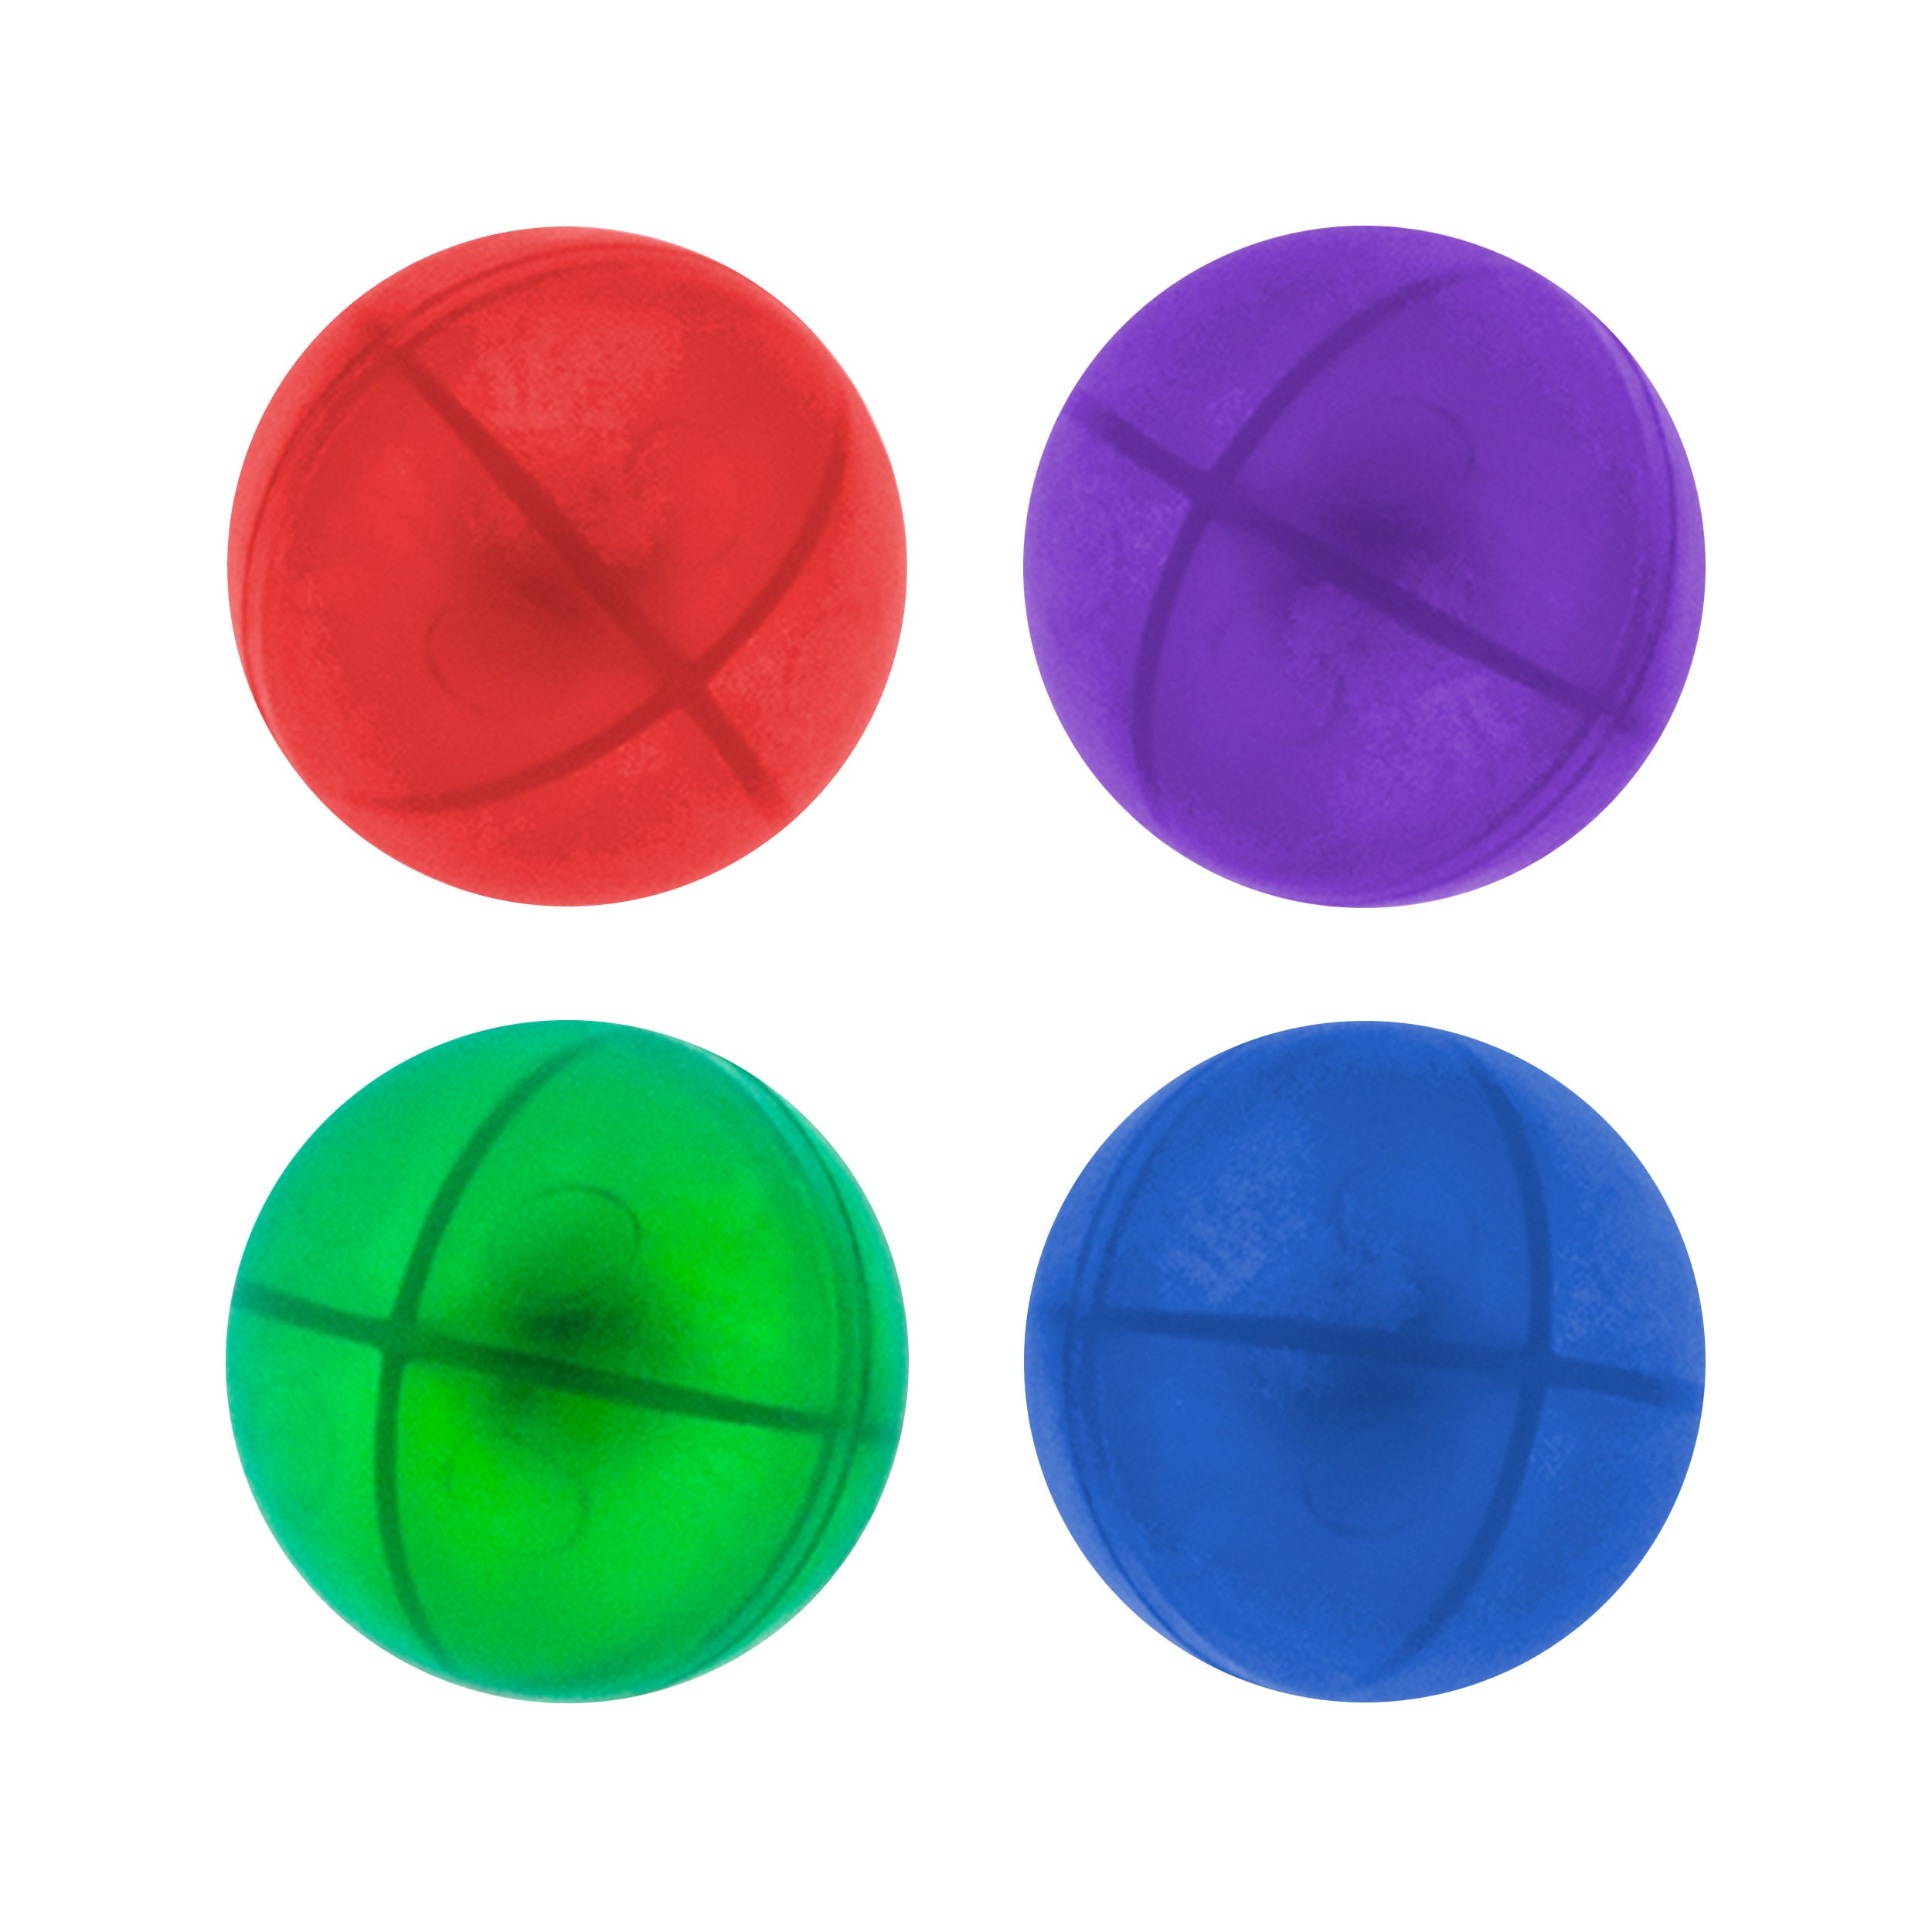 3. Sphere, How to Make a Ball with Magnetic Blocks